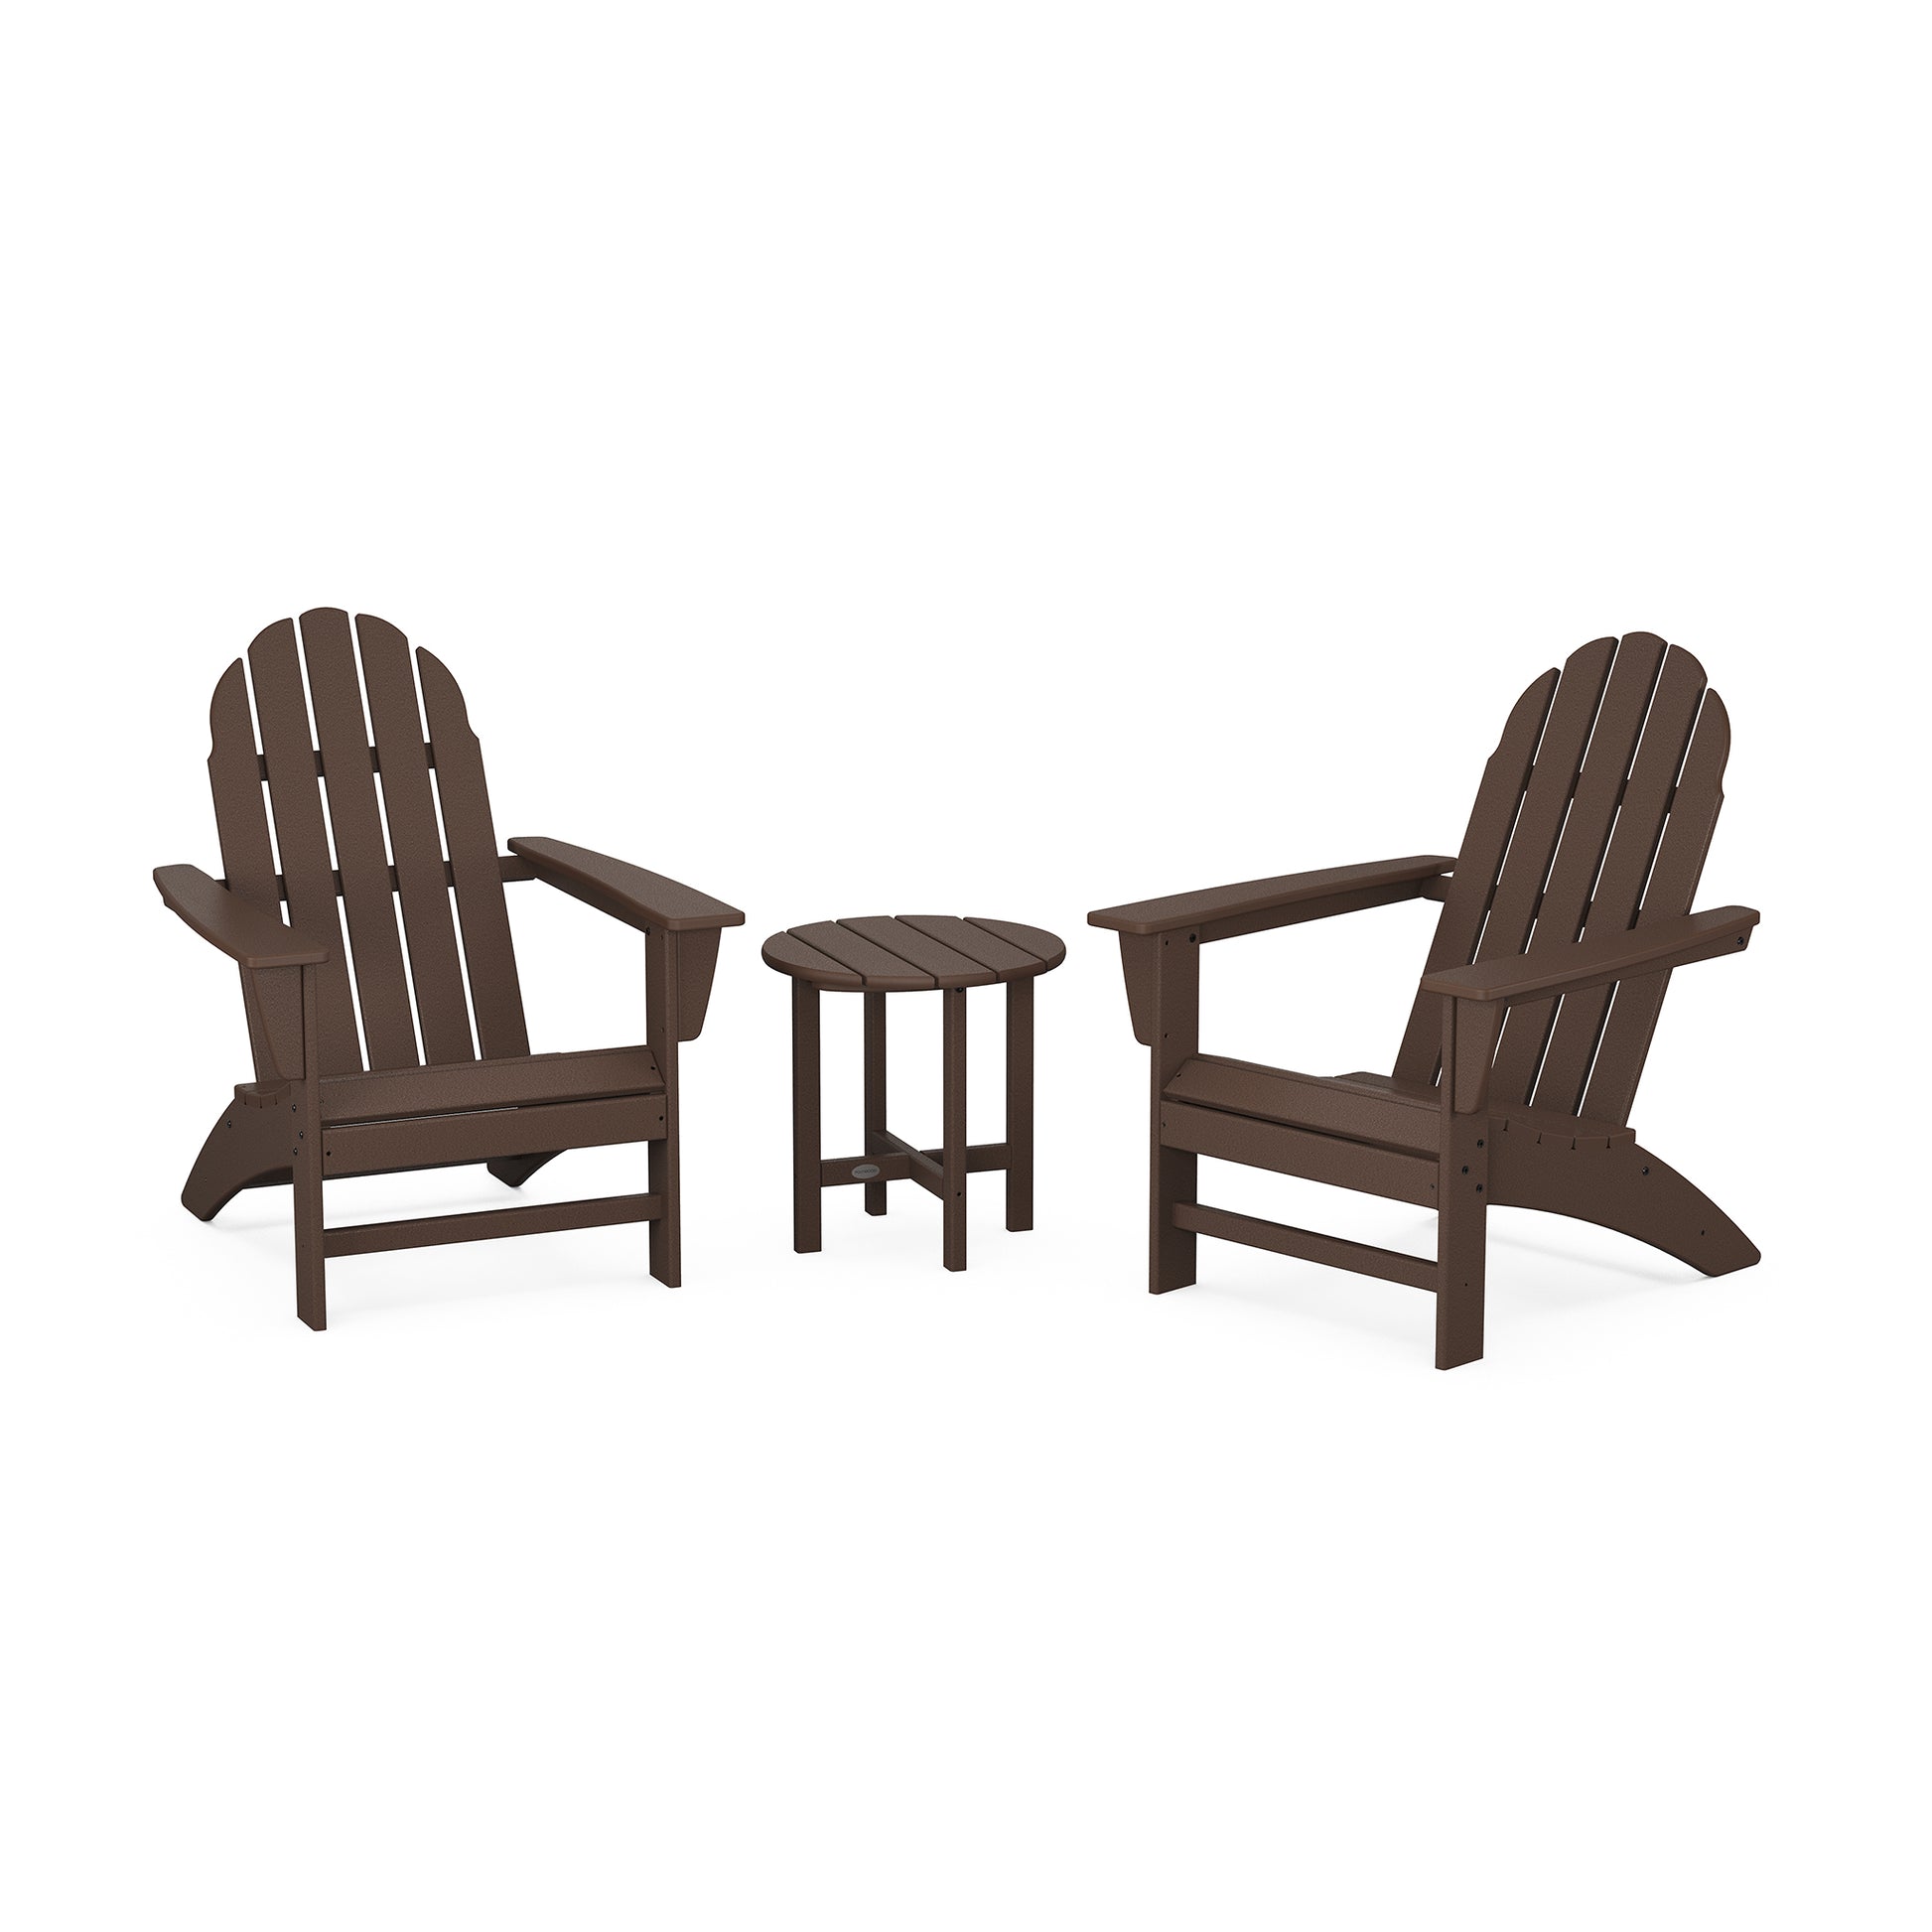 Two brown contoured POLYWOOD Vineyard Adirondack chairs facing each other with a small round table between them, set against a plain white background.